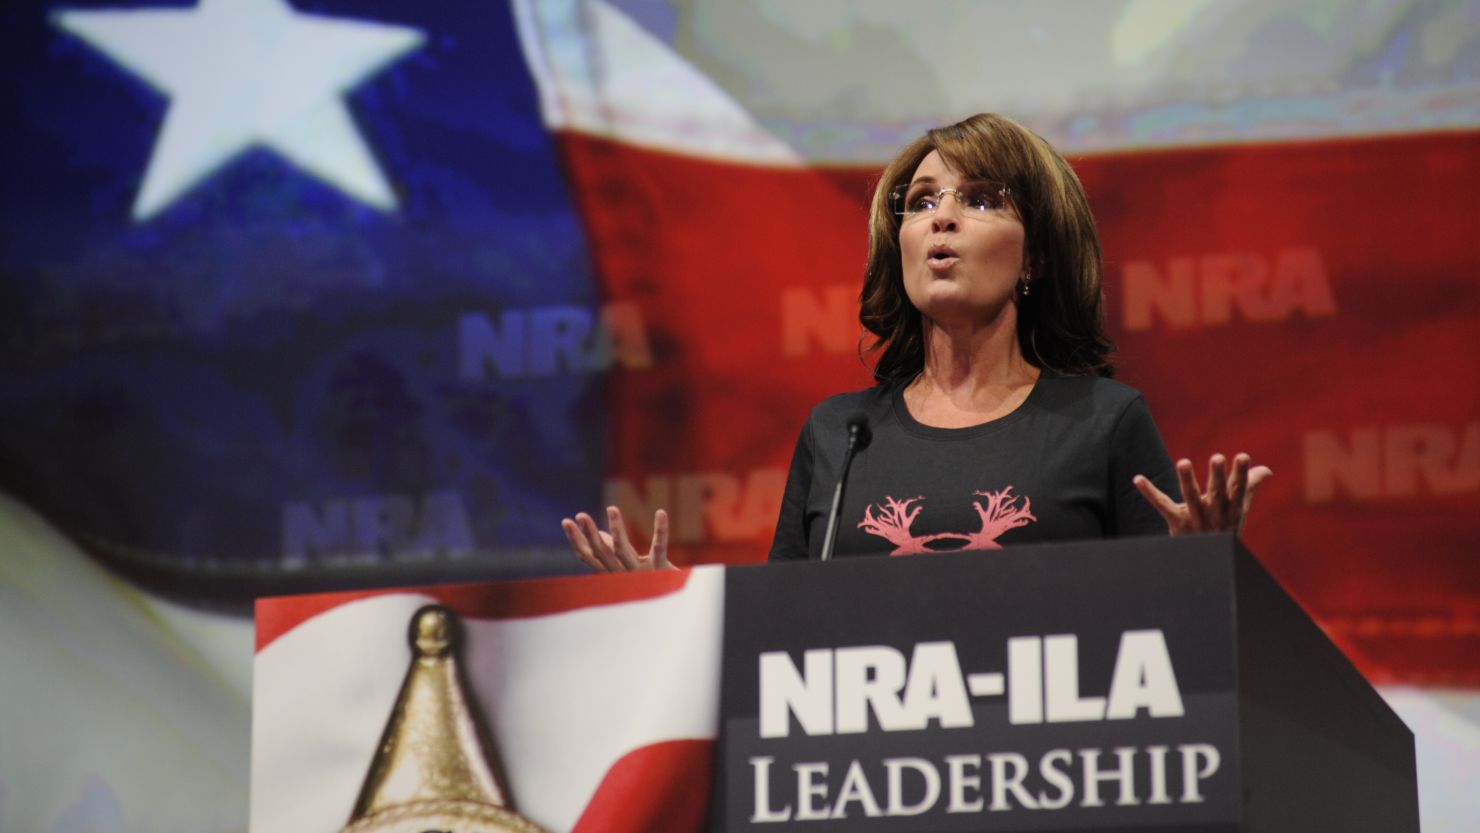 Sarah Palin speaks at the National Rifle Association Leadership Forum in Houston in May.